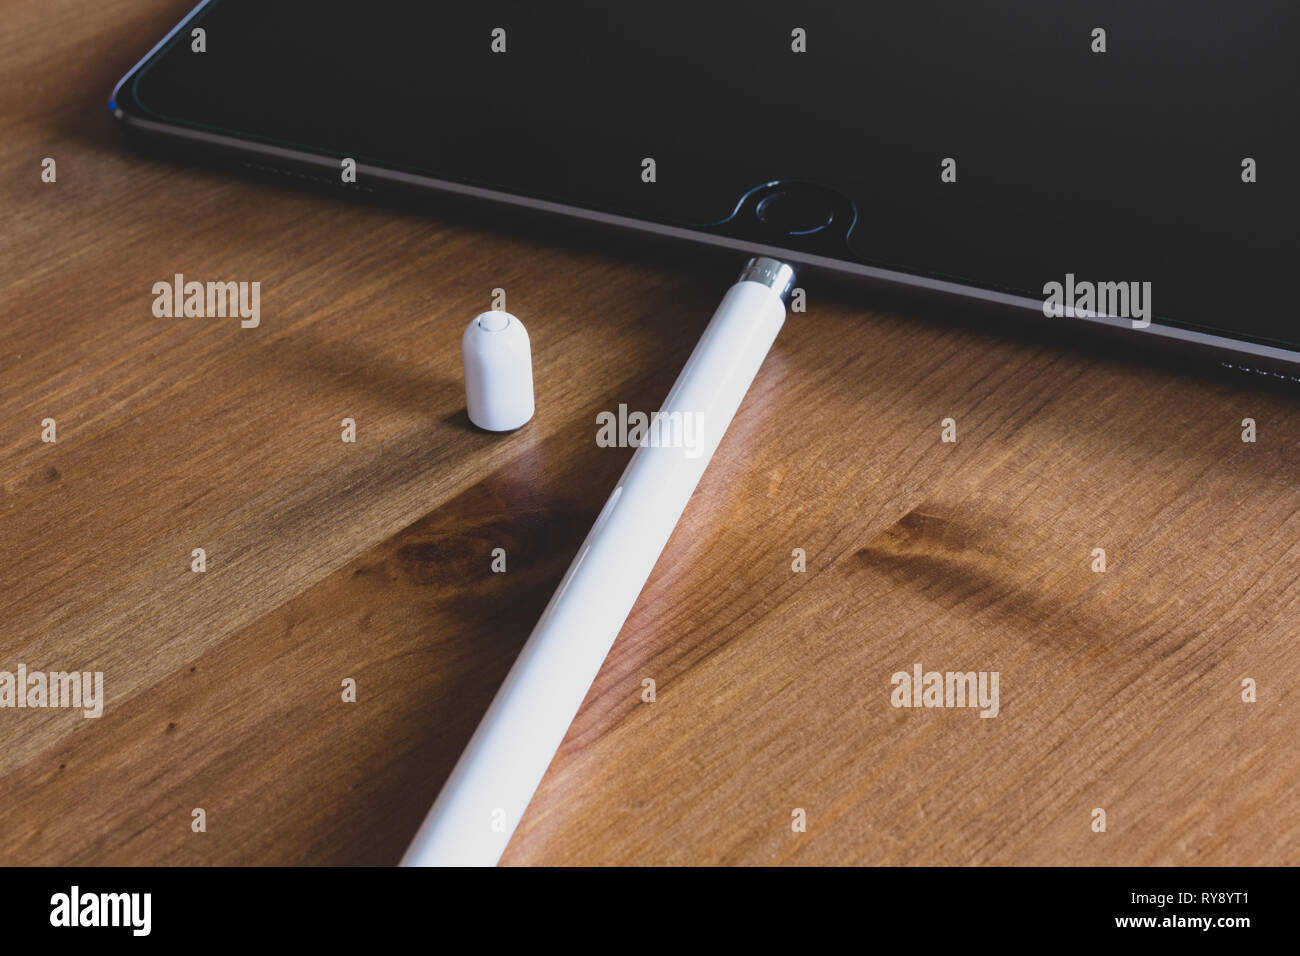 Apple Pencil 2015 1st generation connected to iPad Pro charging on natural wooden table Stock Photo